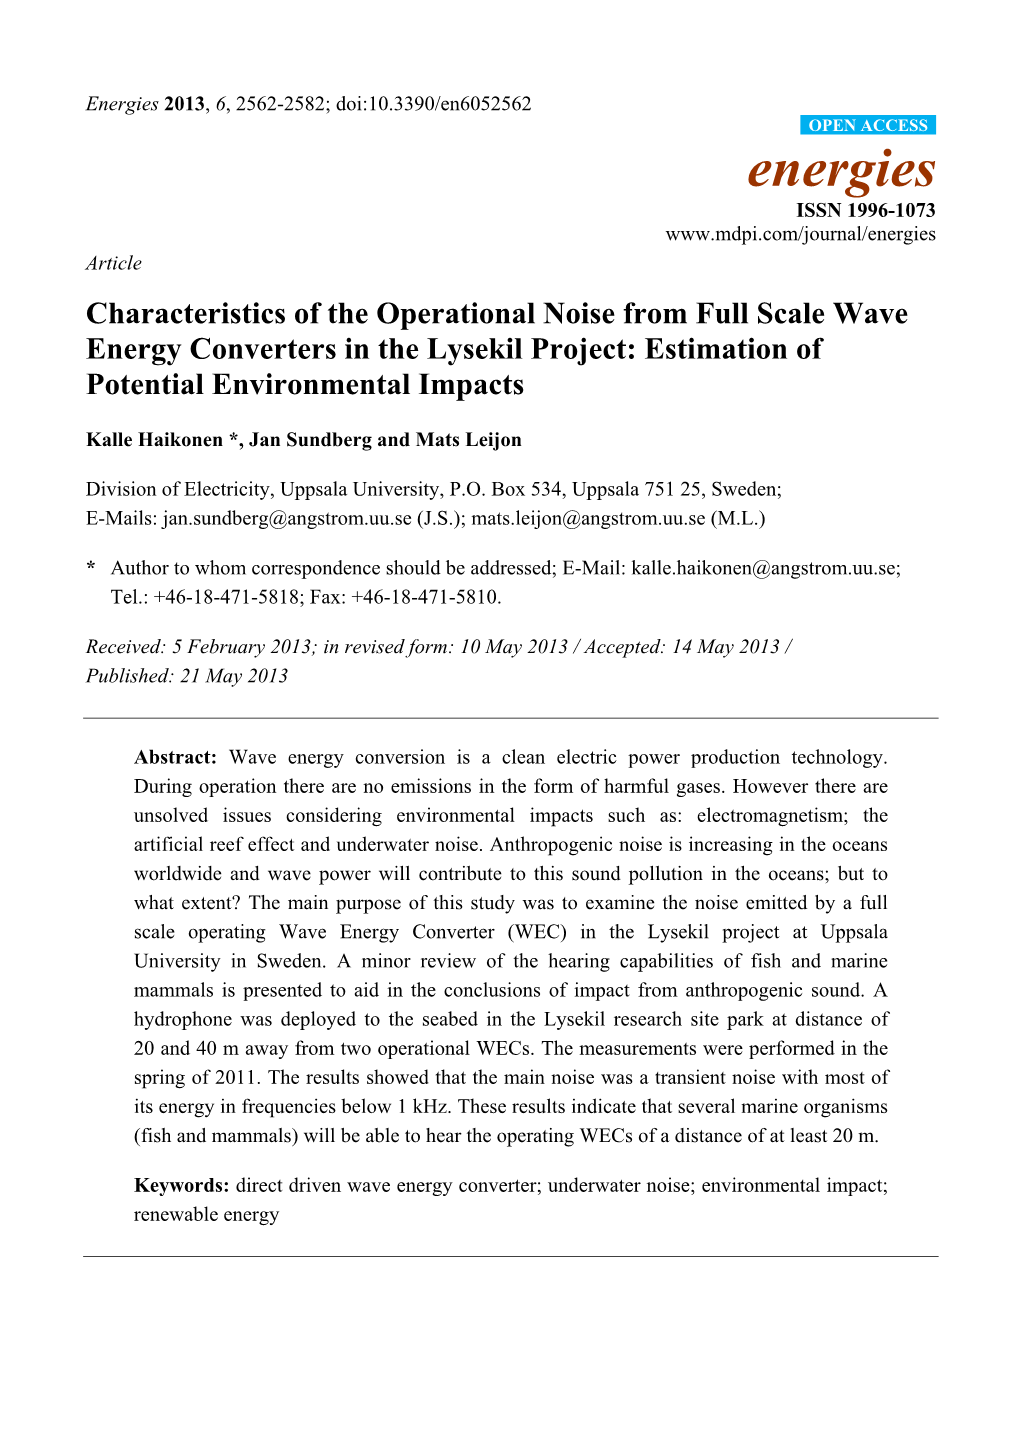 Characteristics of the Operational Noise from Full Scale Wave Energy Converters in the Lysekil Project: Estimation of Potential Environmental Impacts